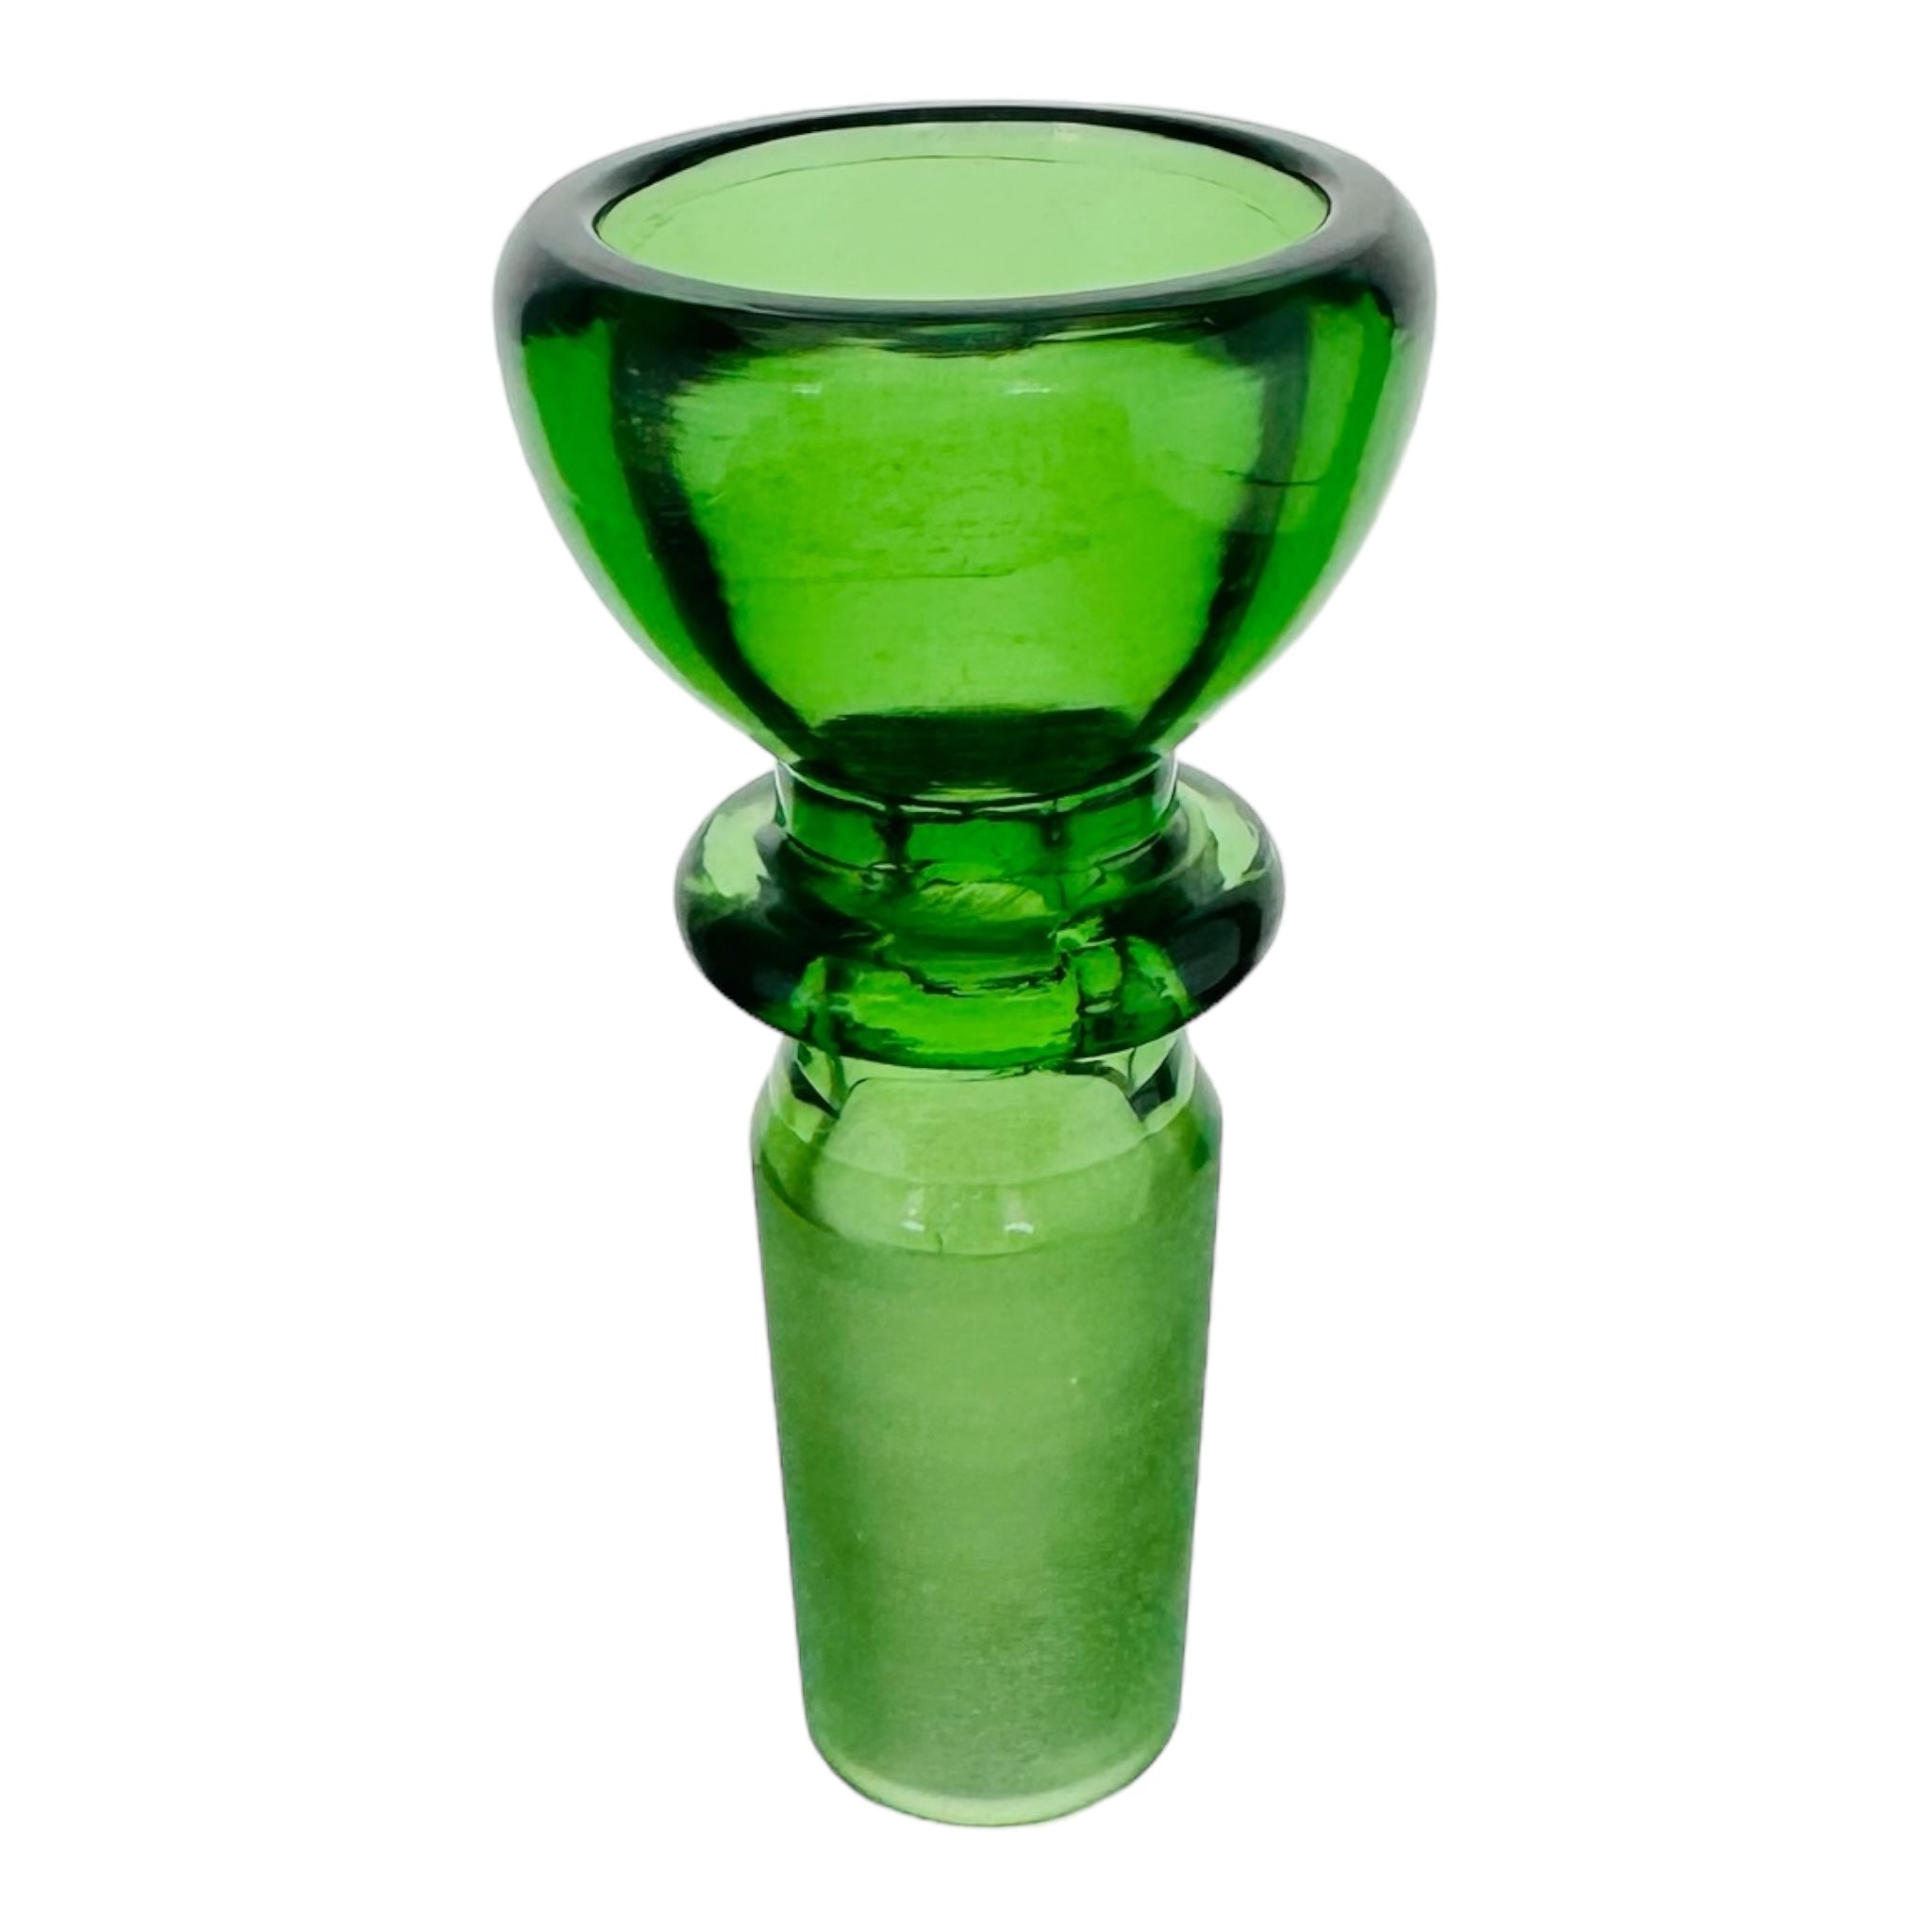 14mm Bong Bowl With Full Green Color